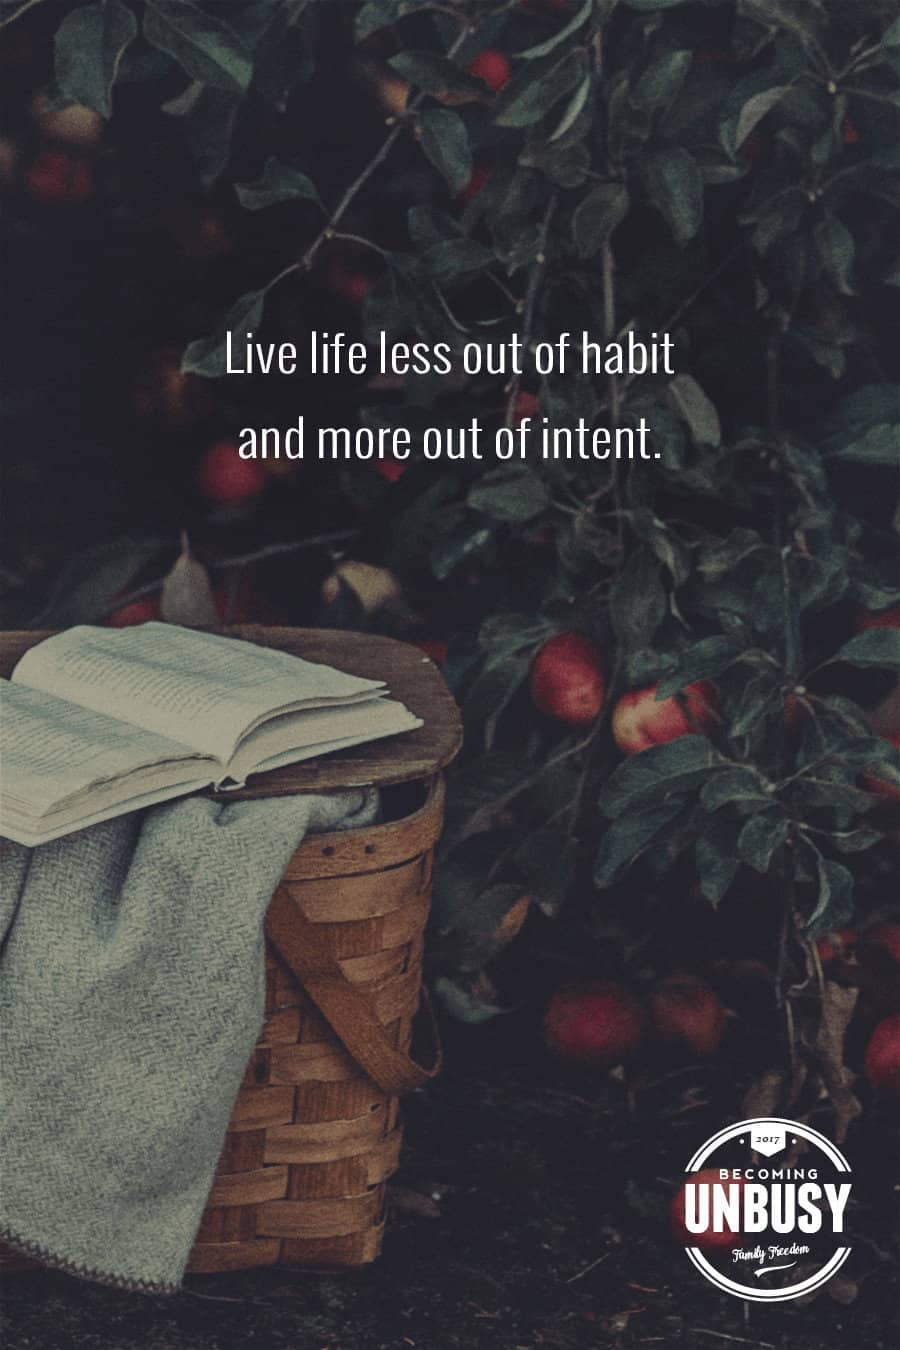 The following fall bucket list quote written over a photo of a picnic basket and book at an apple orchard, "Live life less out of habit and more out of intent."